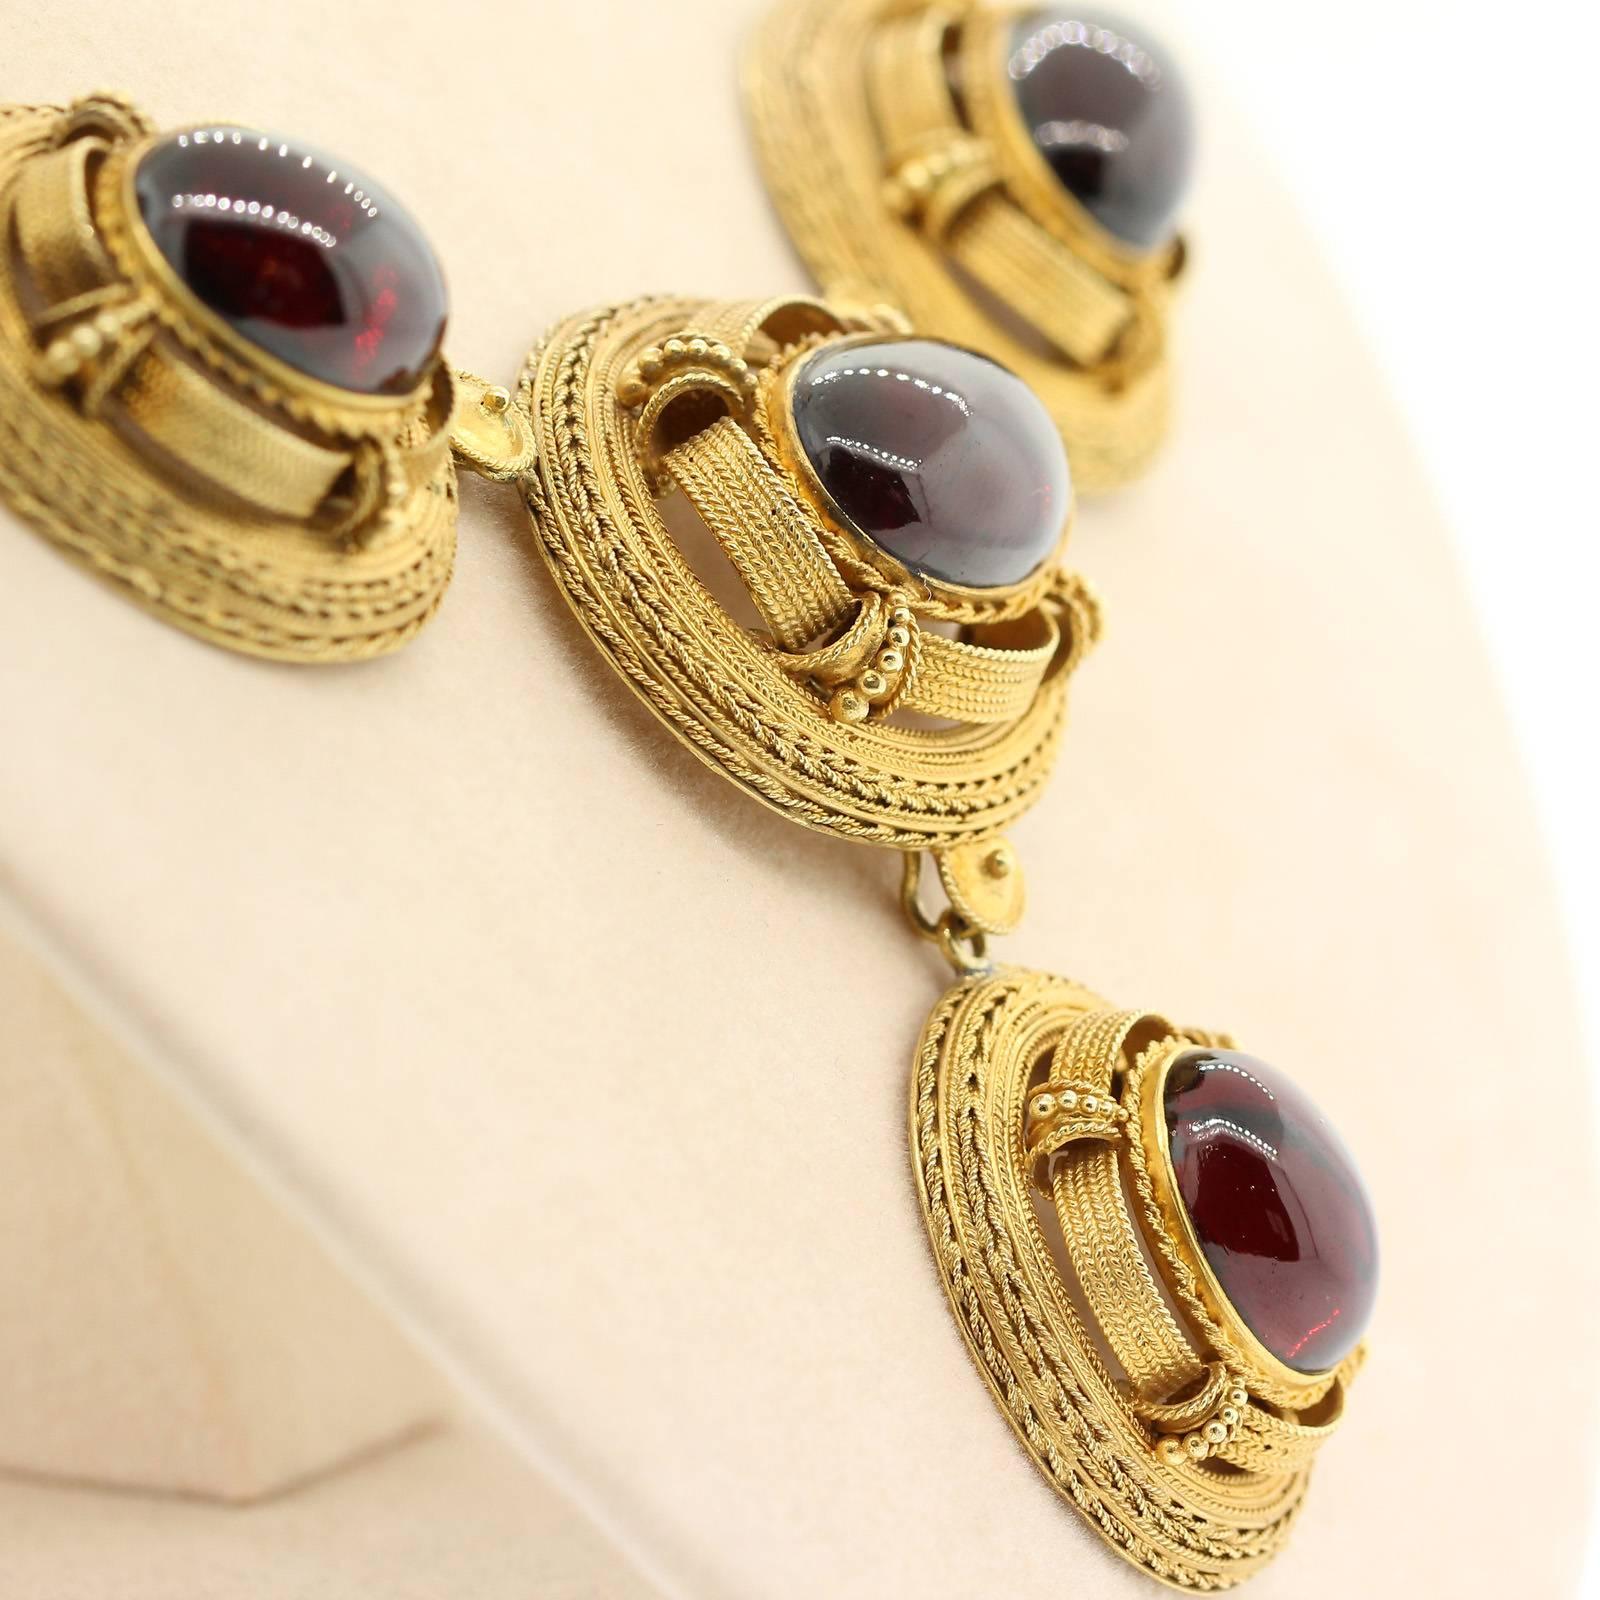 All original, antique, one of a kind handmade Garnet and 15KT yellow Victorian necklace.  The coveted English necklace is comprised of six elaborately engraved oval sections, each set with a cabochon Garnet.  The suspended bottom section is